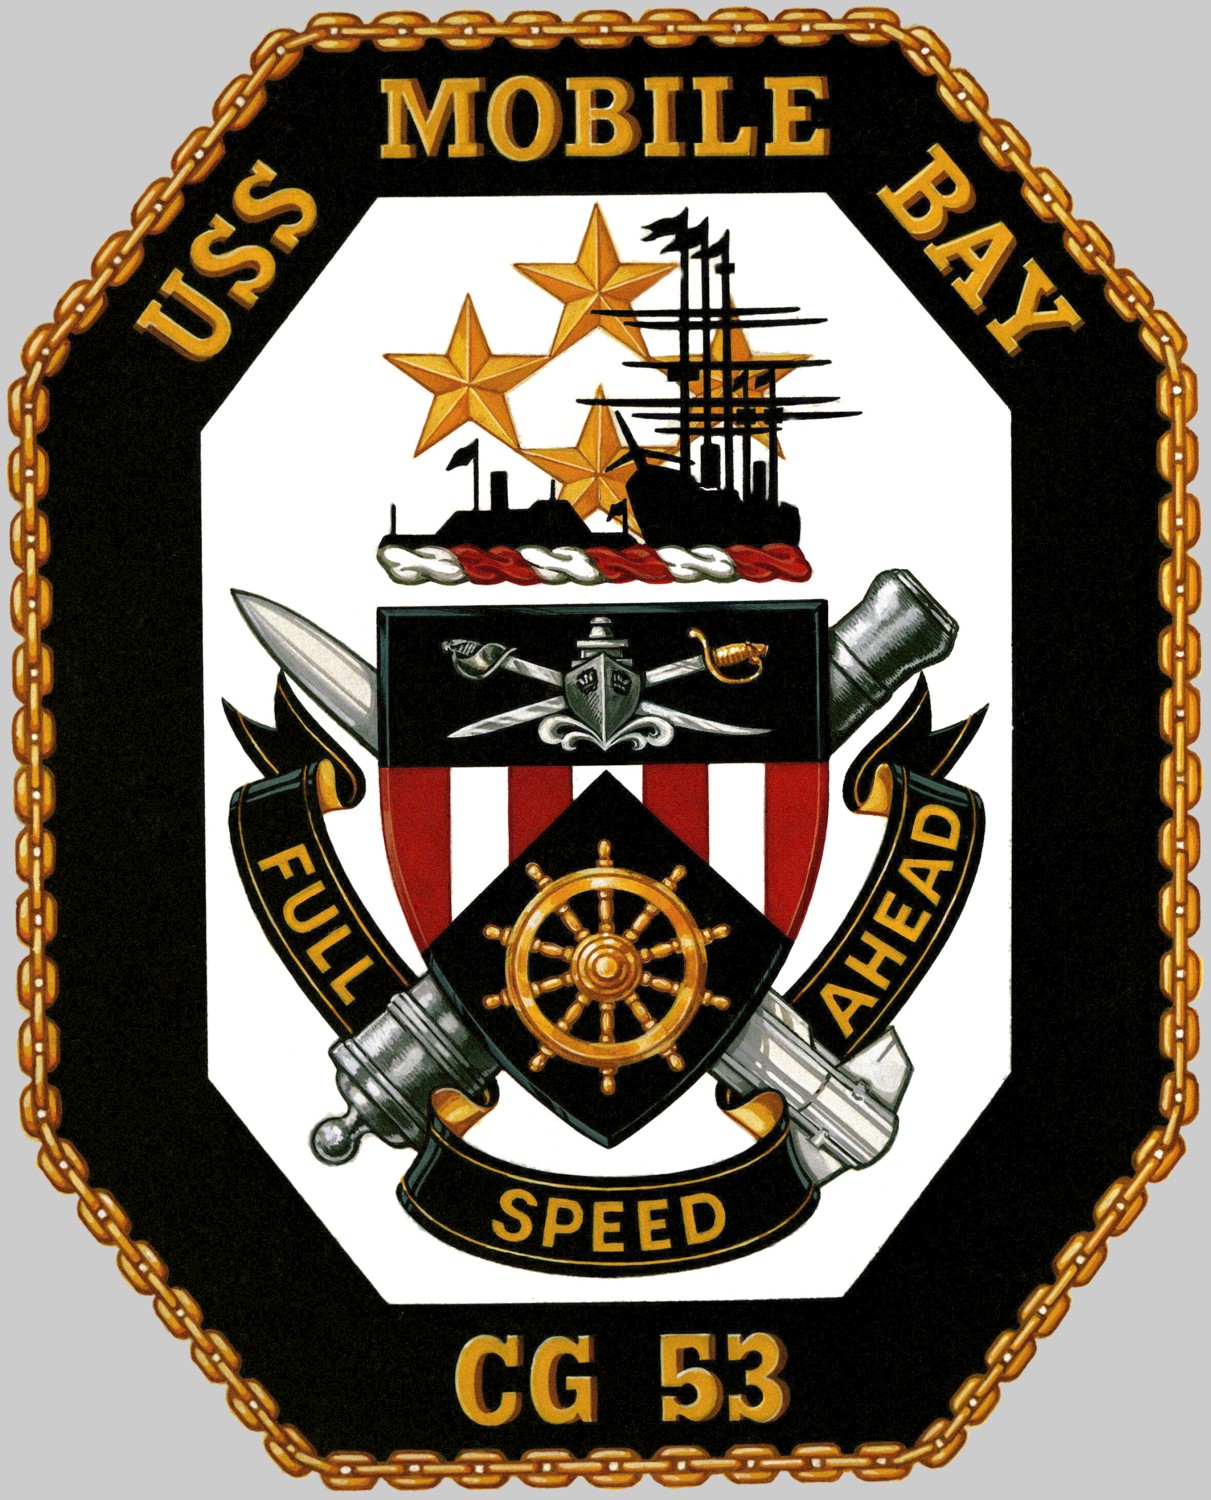 cg-53 uss mobile bay insignia crest patch badge ticonderoga class guided missile cruiser aegis us navy 03c